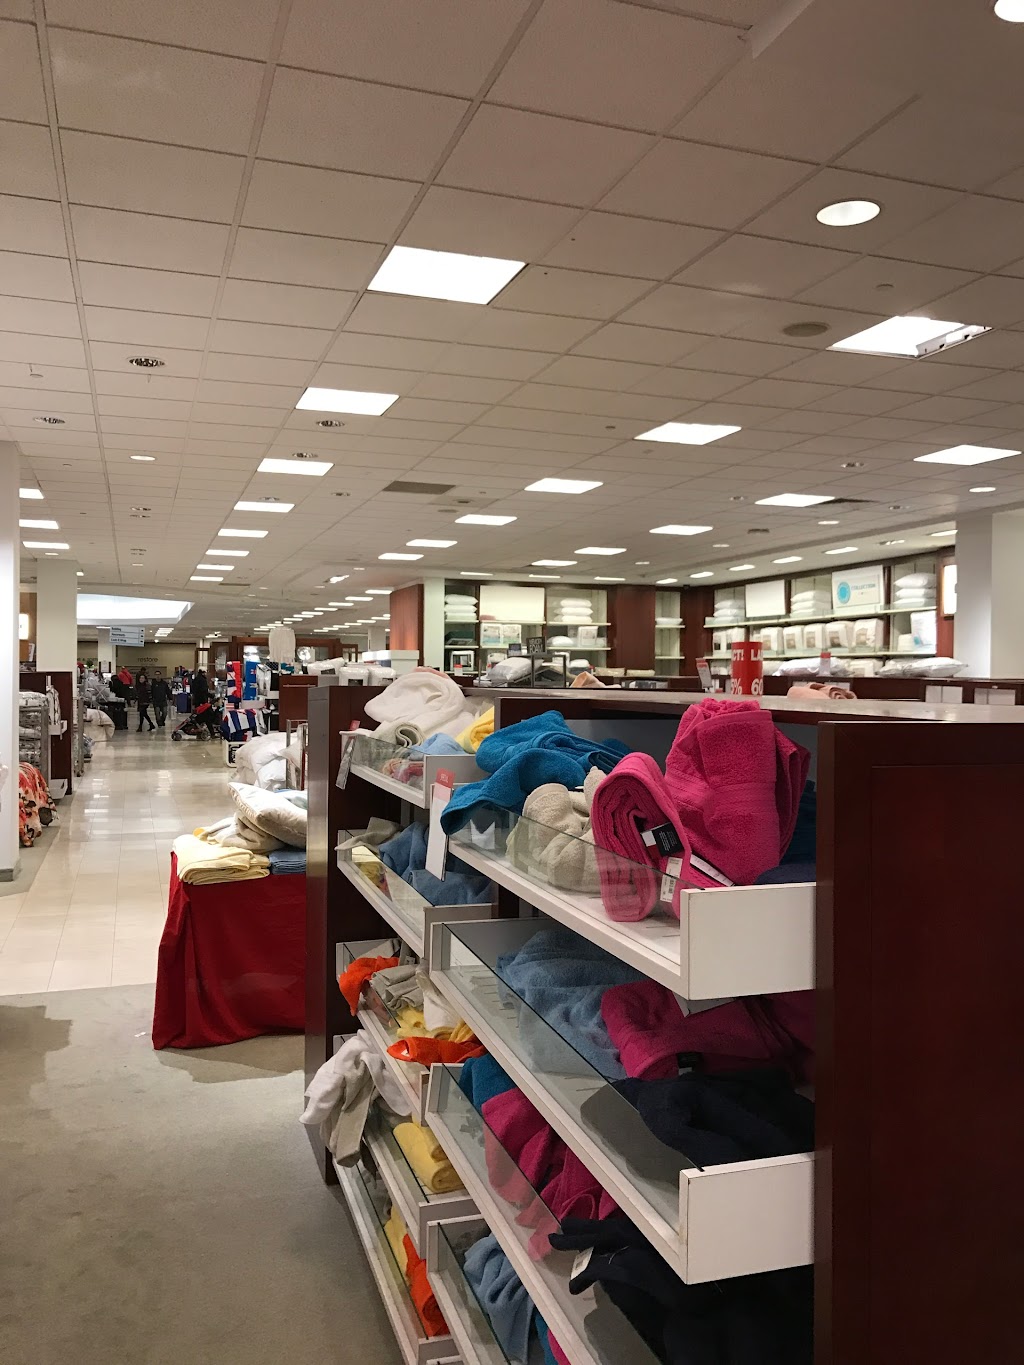 Macys | 2500 W Moreland Rd Suite 3050, Willow Grove, PA 19090 | Phone: (215) 658-4700